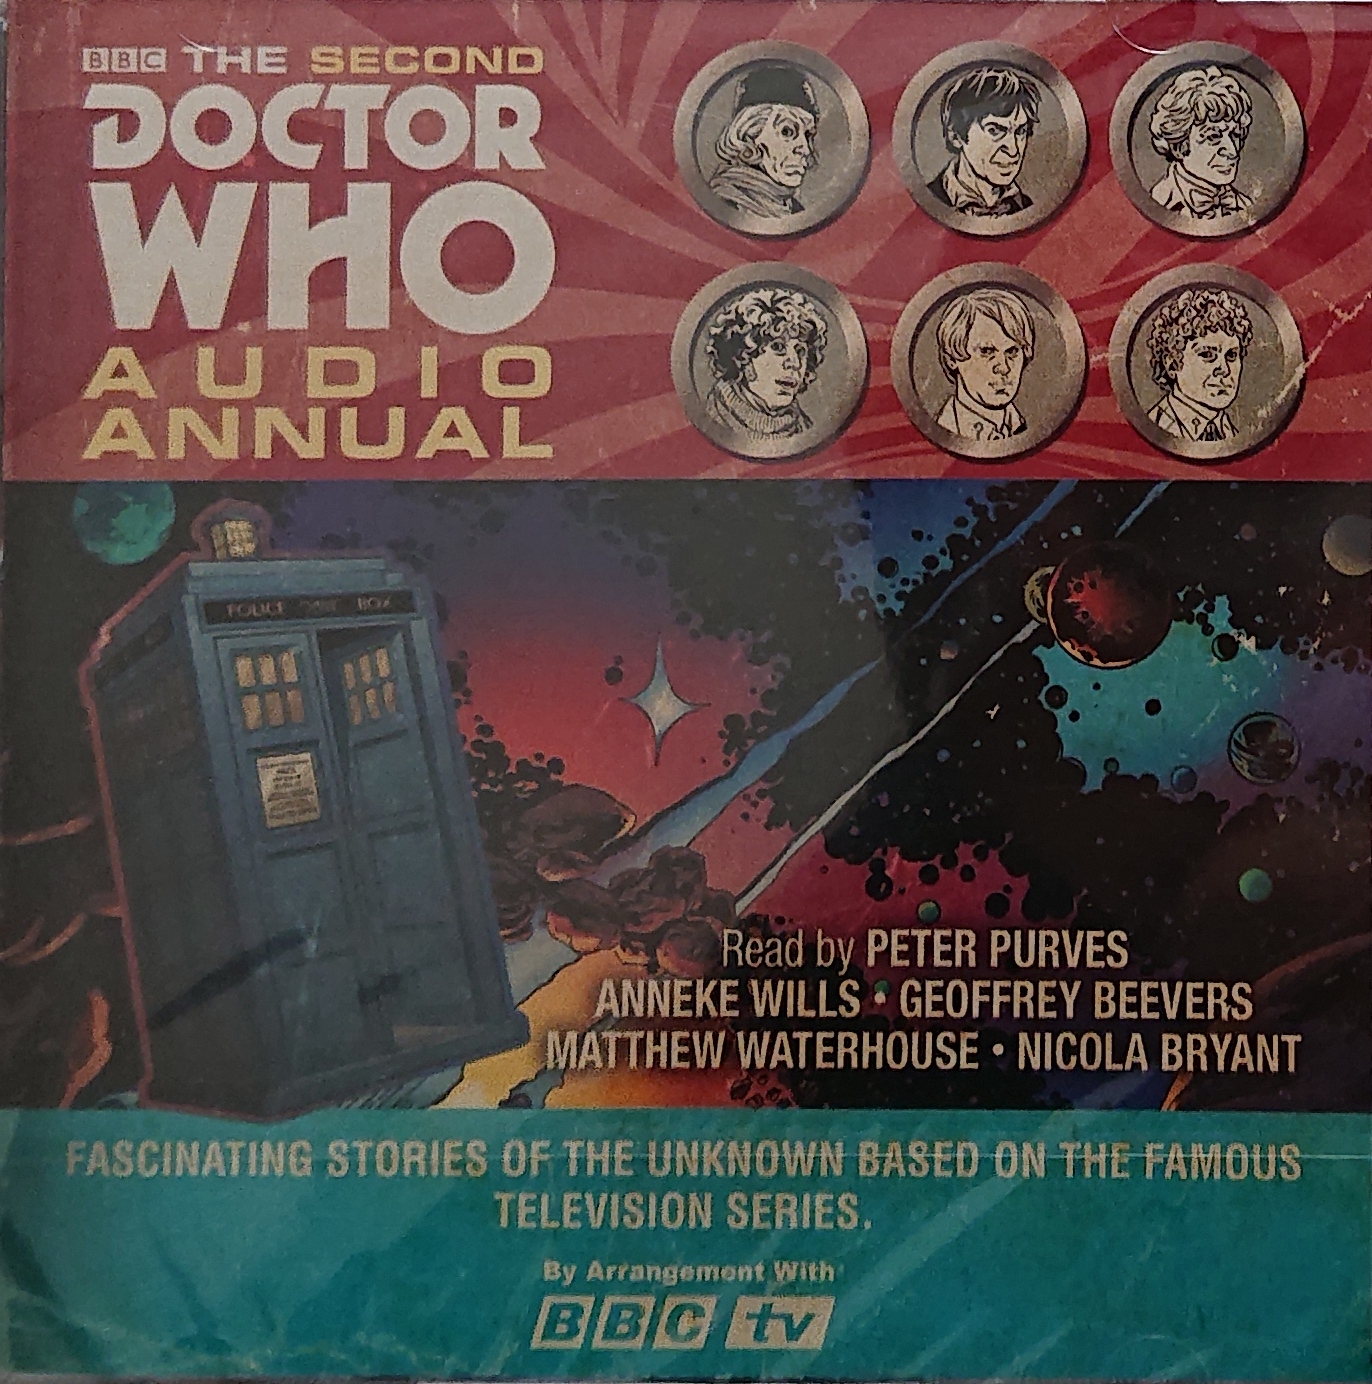 Picture of ISBN 978-1-78529-983-4 Doctor Who - Audio annual by artist Various from the BBC cds - Records and Tapes library